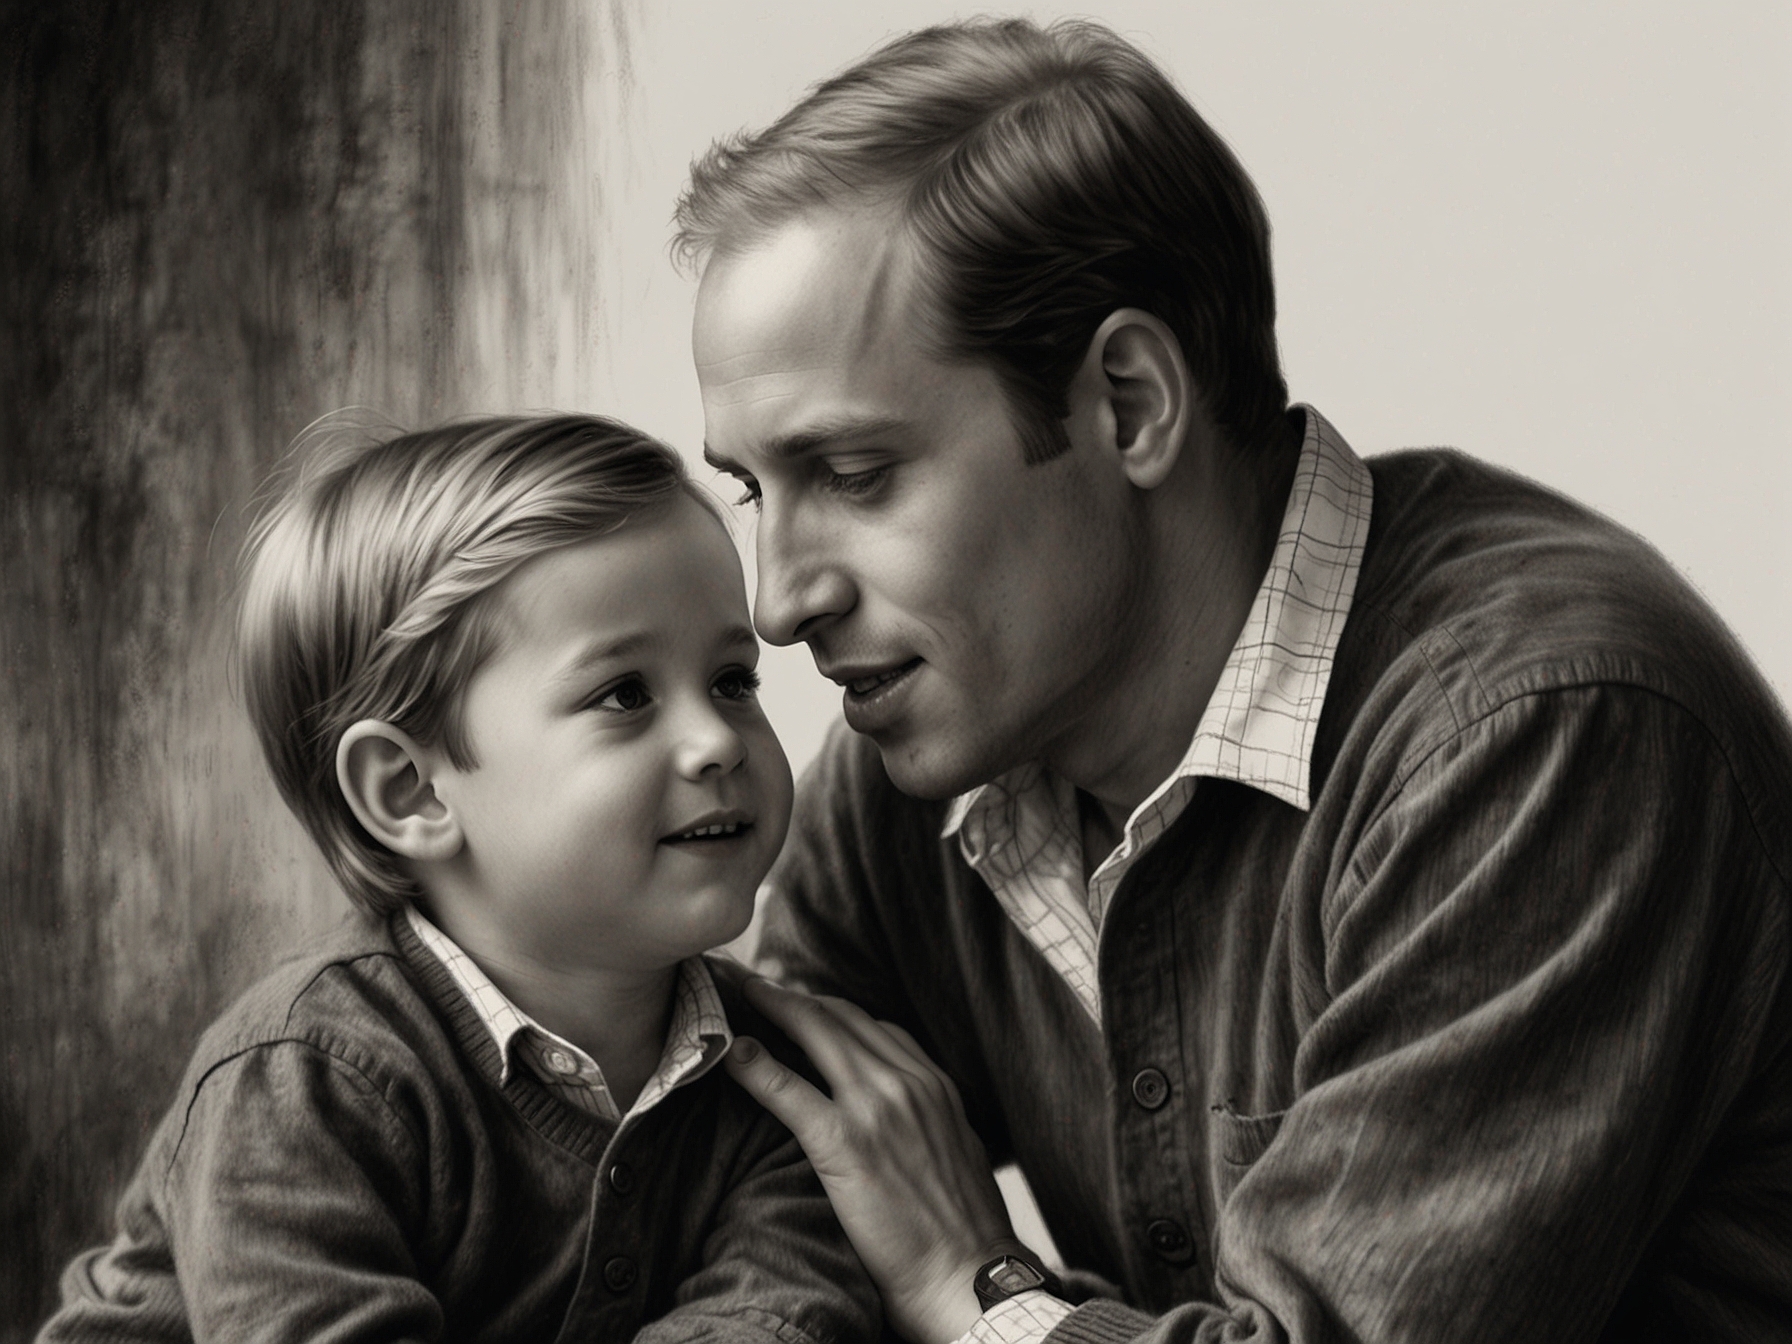 A heartwarming black-and-white photo of a young Prince William with his father, King Charles, showcasing a tender moment of bonding that reflects their deep father-son relationship.